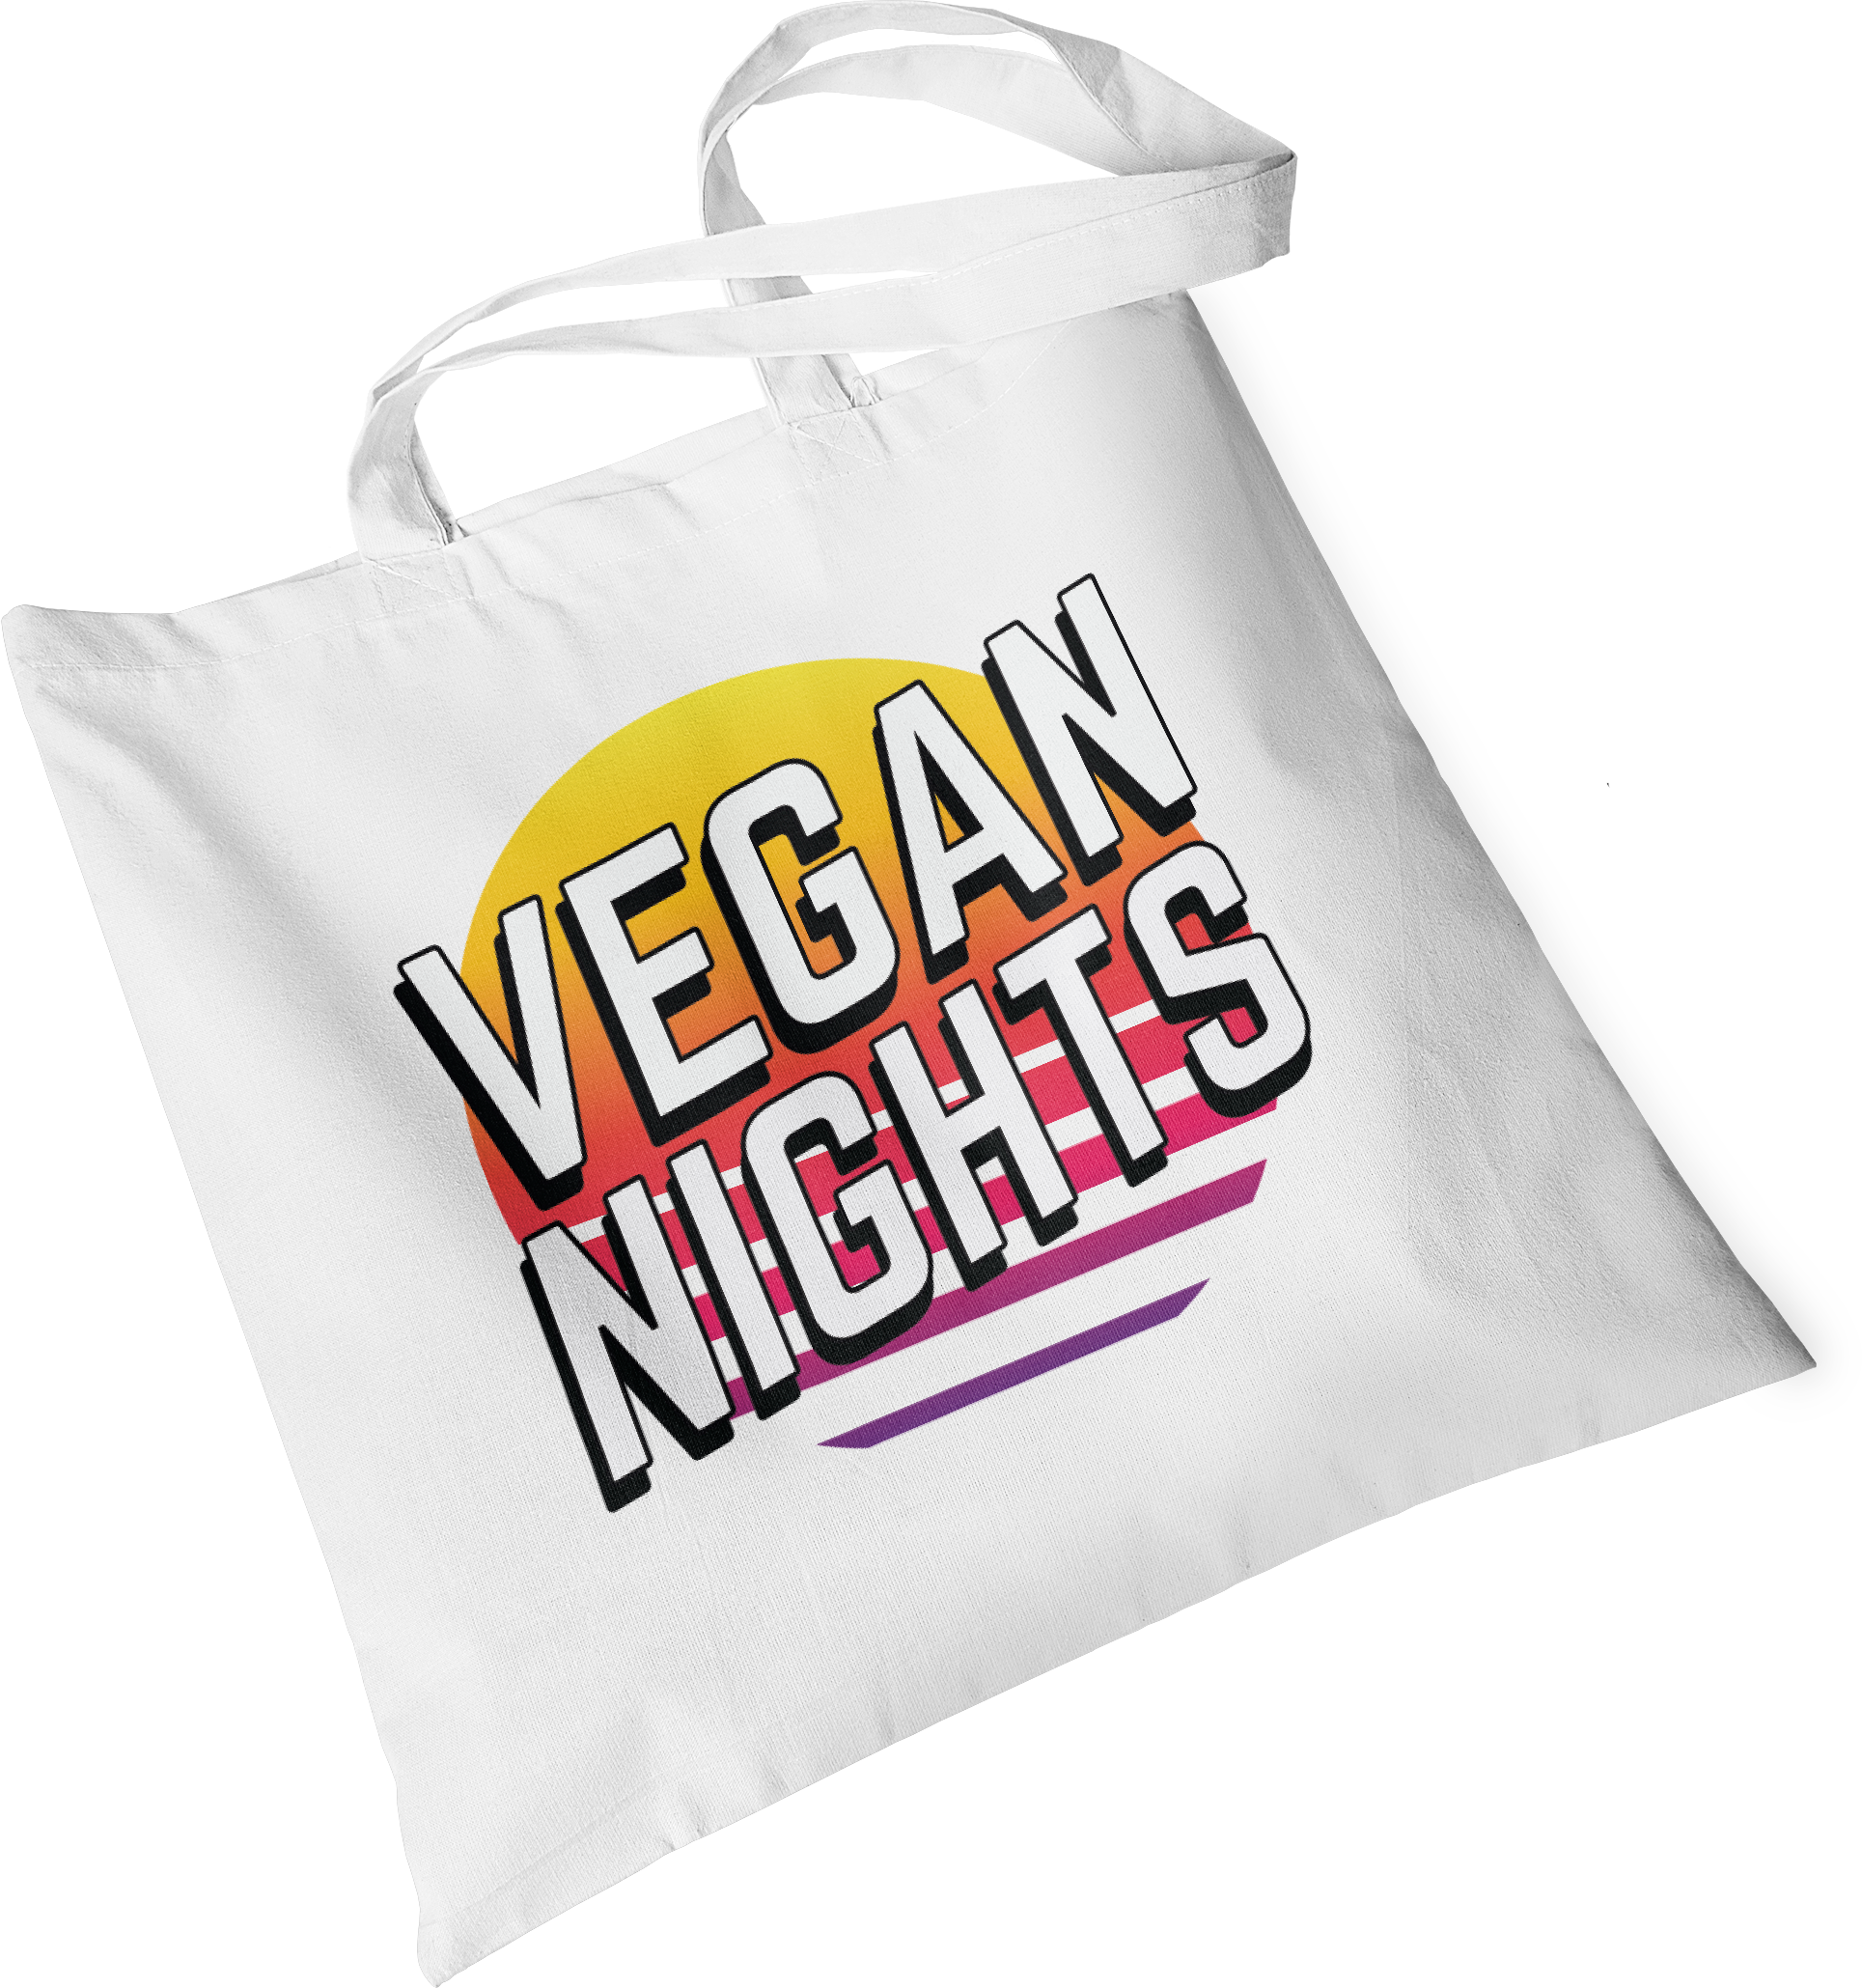 Canvas Tote bag with Vegan nights logo printed on it. 'Vegan Nights' written in the middle in full colour. One of the canvas designs offered by Hatch.